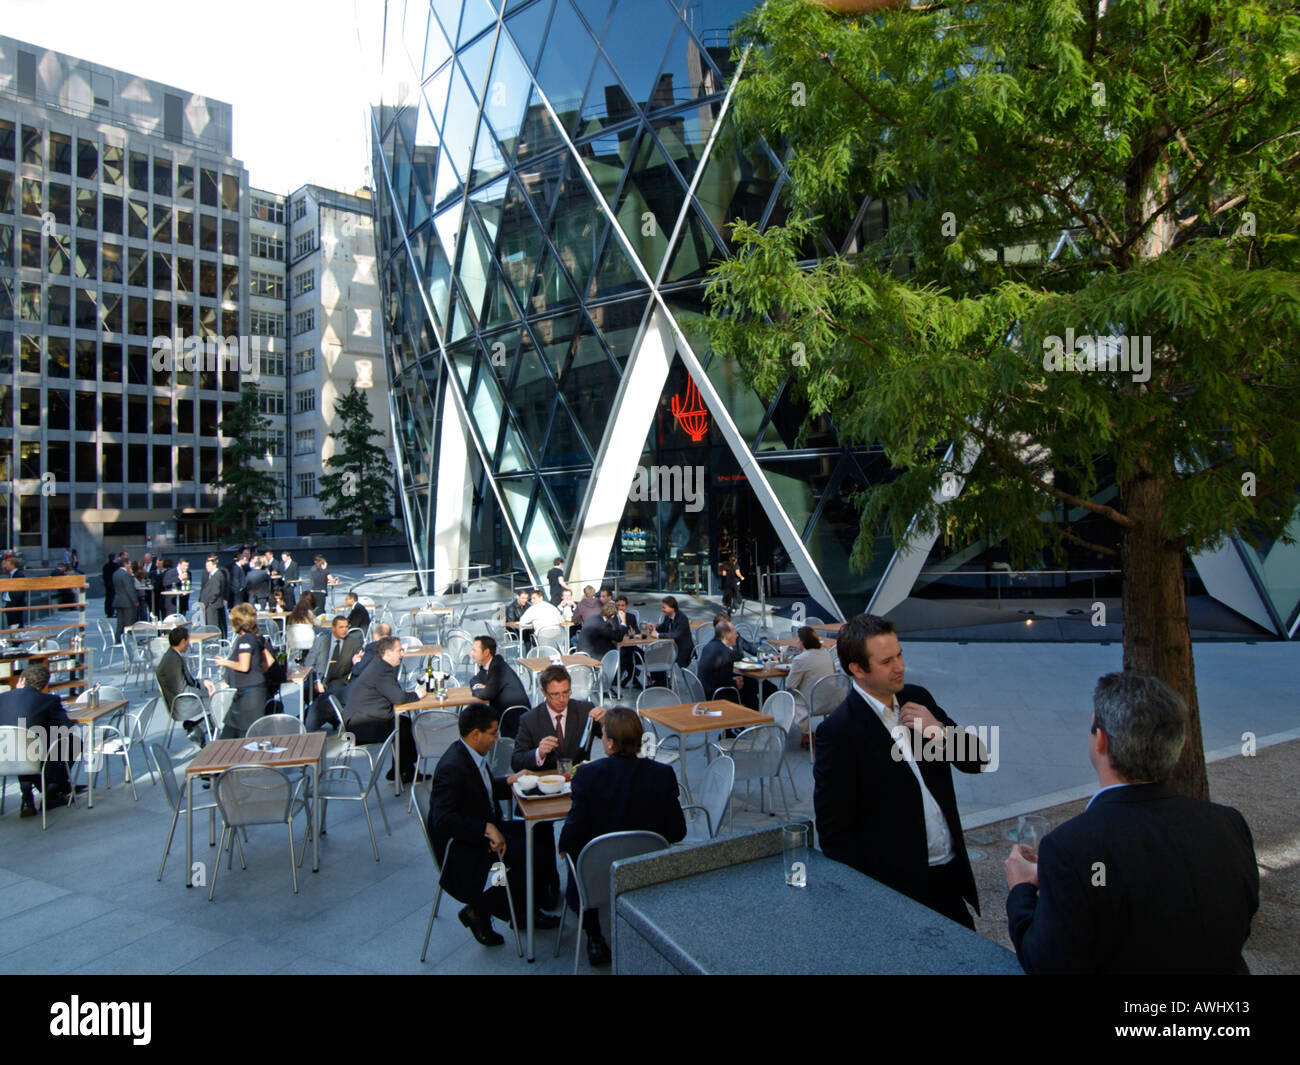 businessmen office workers having lunch lunchtime at the base of the Swiss Reinsurance building a k a the gherkin London UK Stock Photo